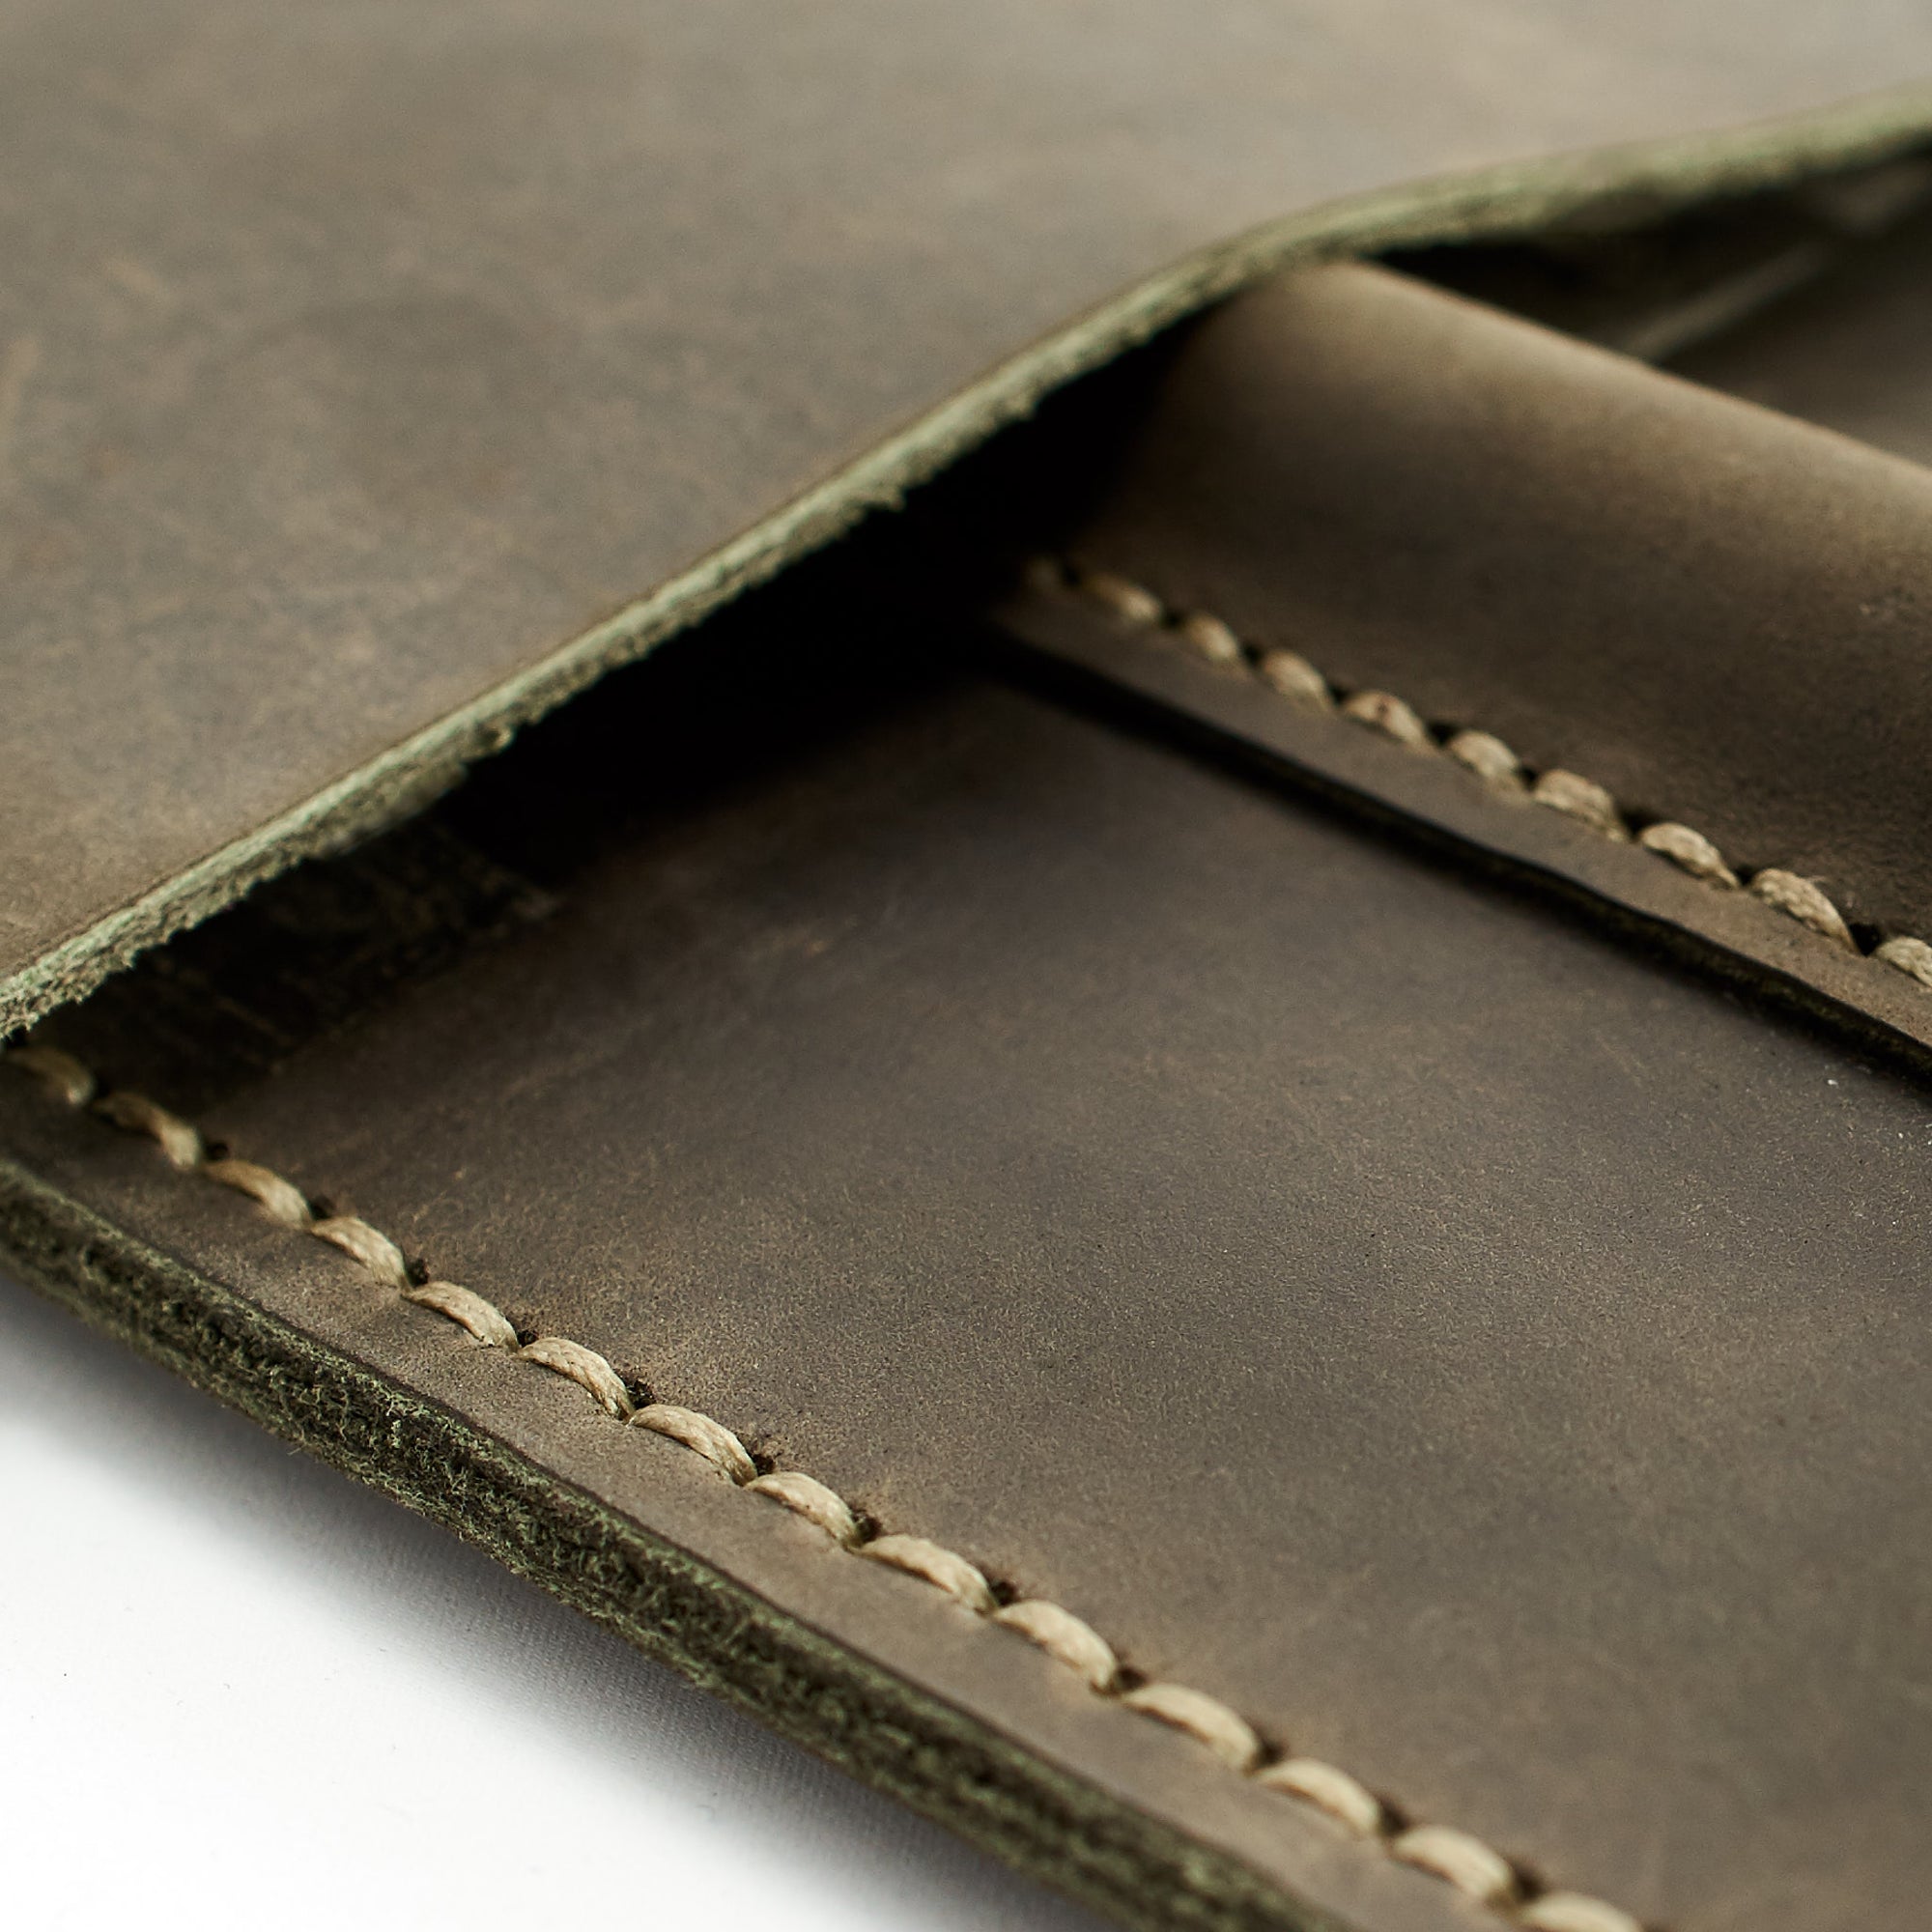 Green hand stitched iPad pro leather sleeve. iPad cover, iPad protector, hand stitched cases for men